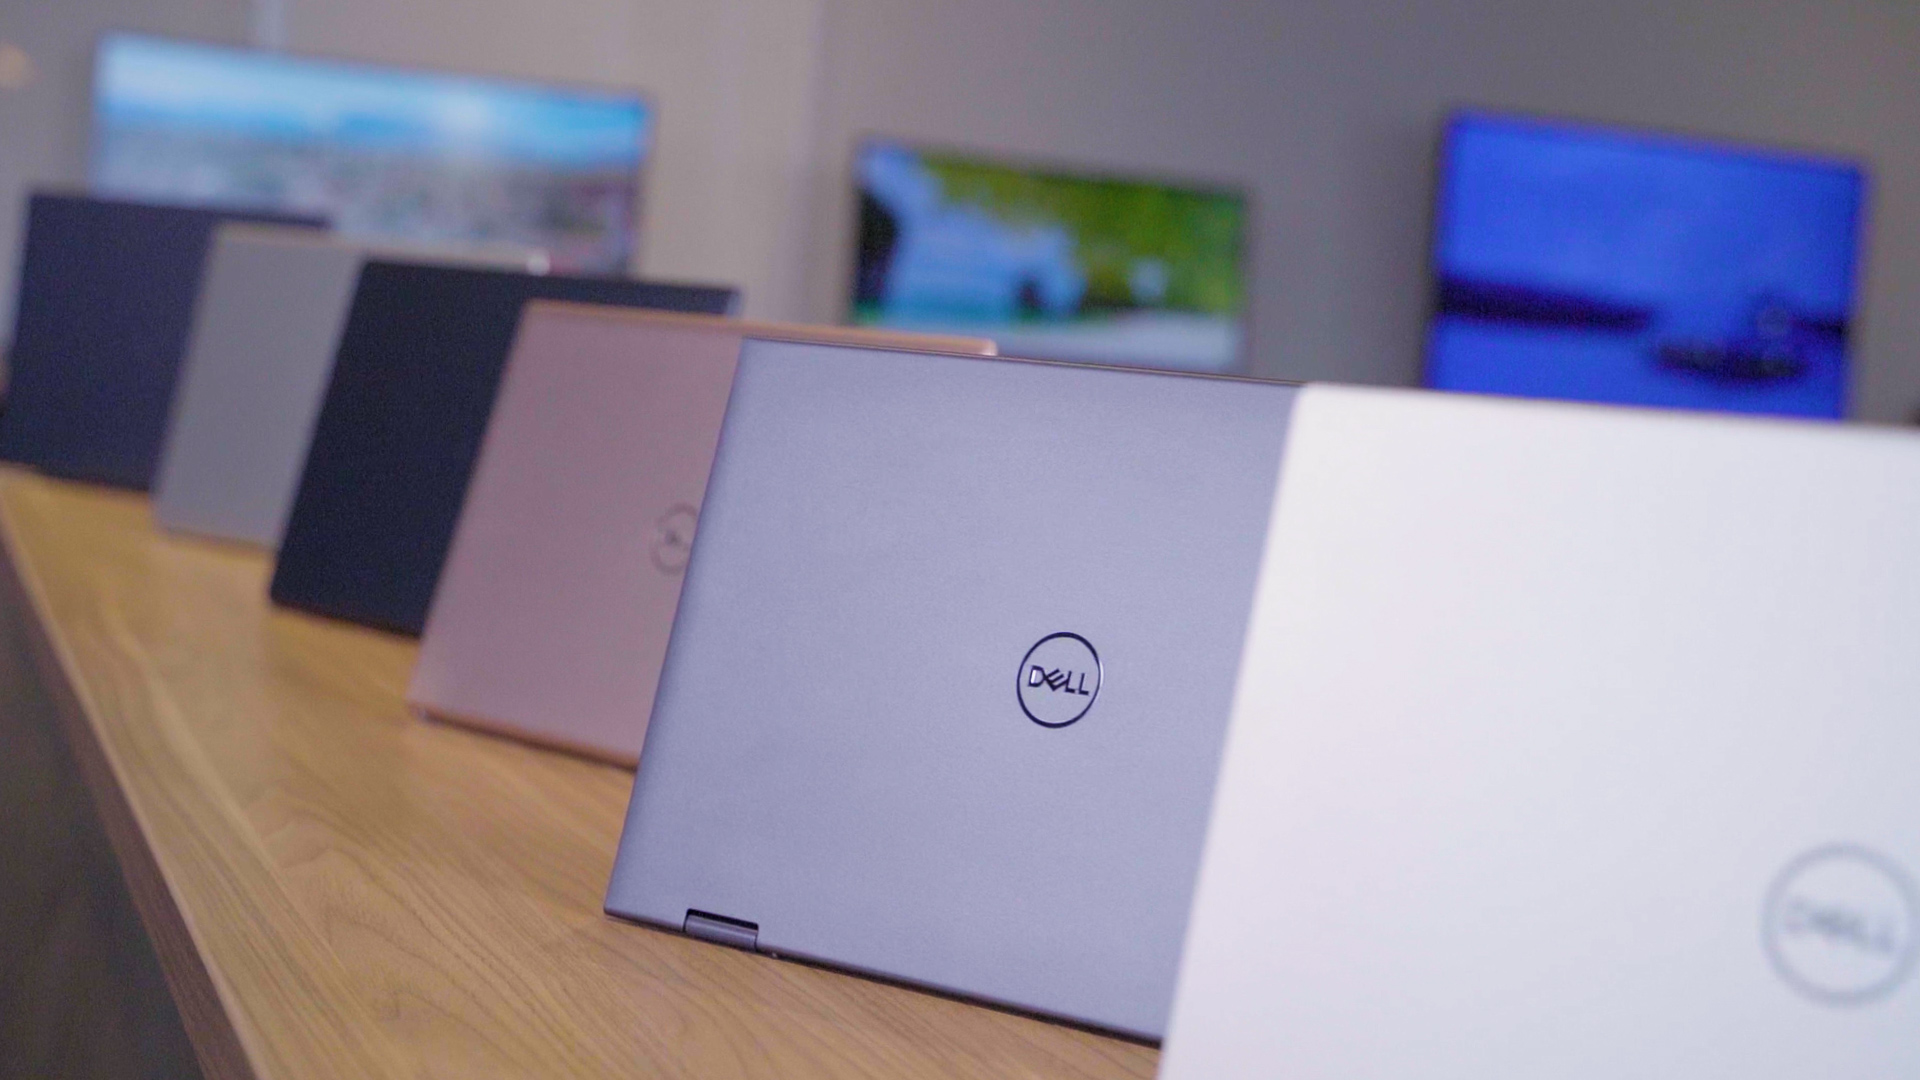 Dell refreshes the Inspiron  models with Tiger Lake H CPUs